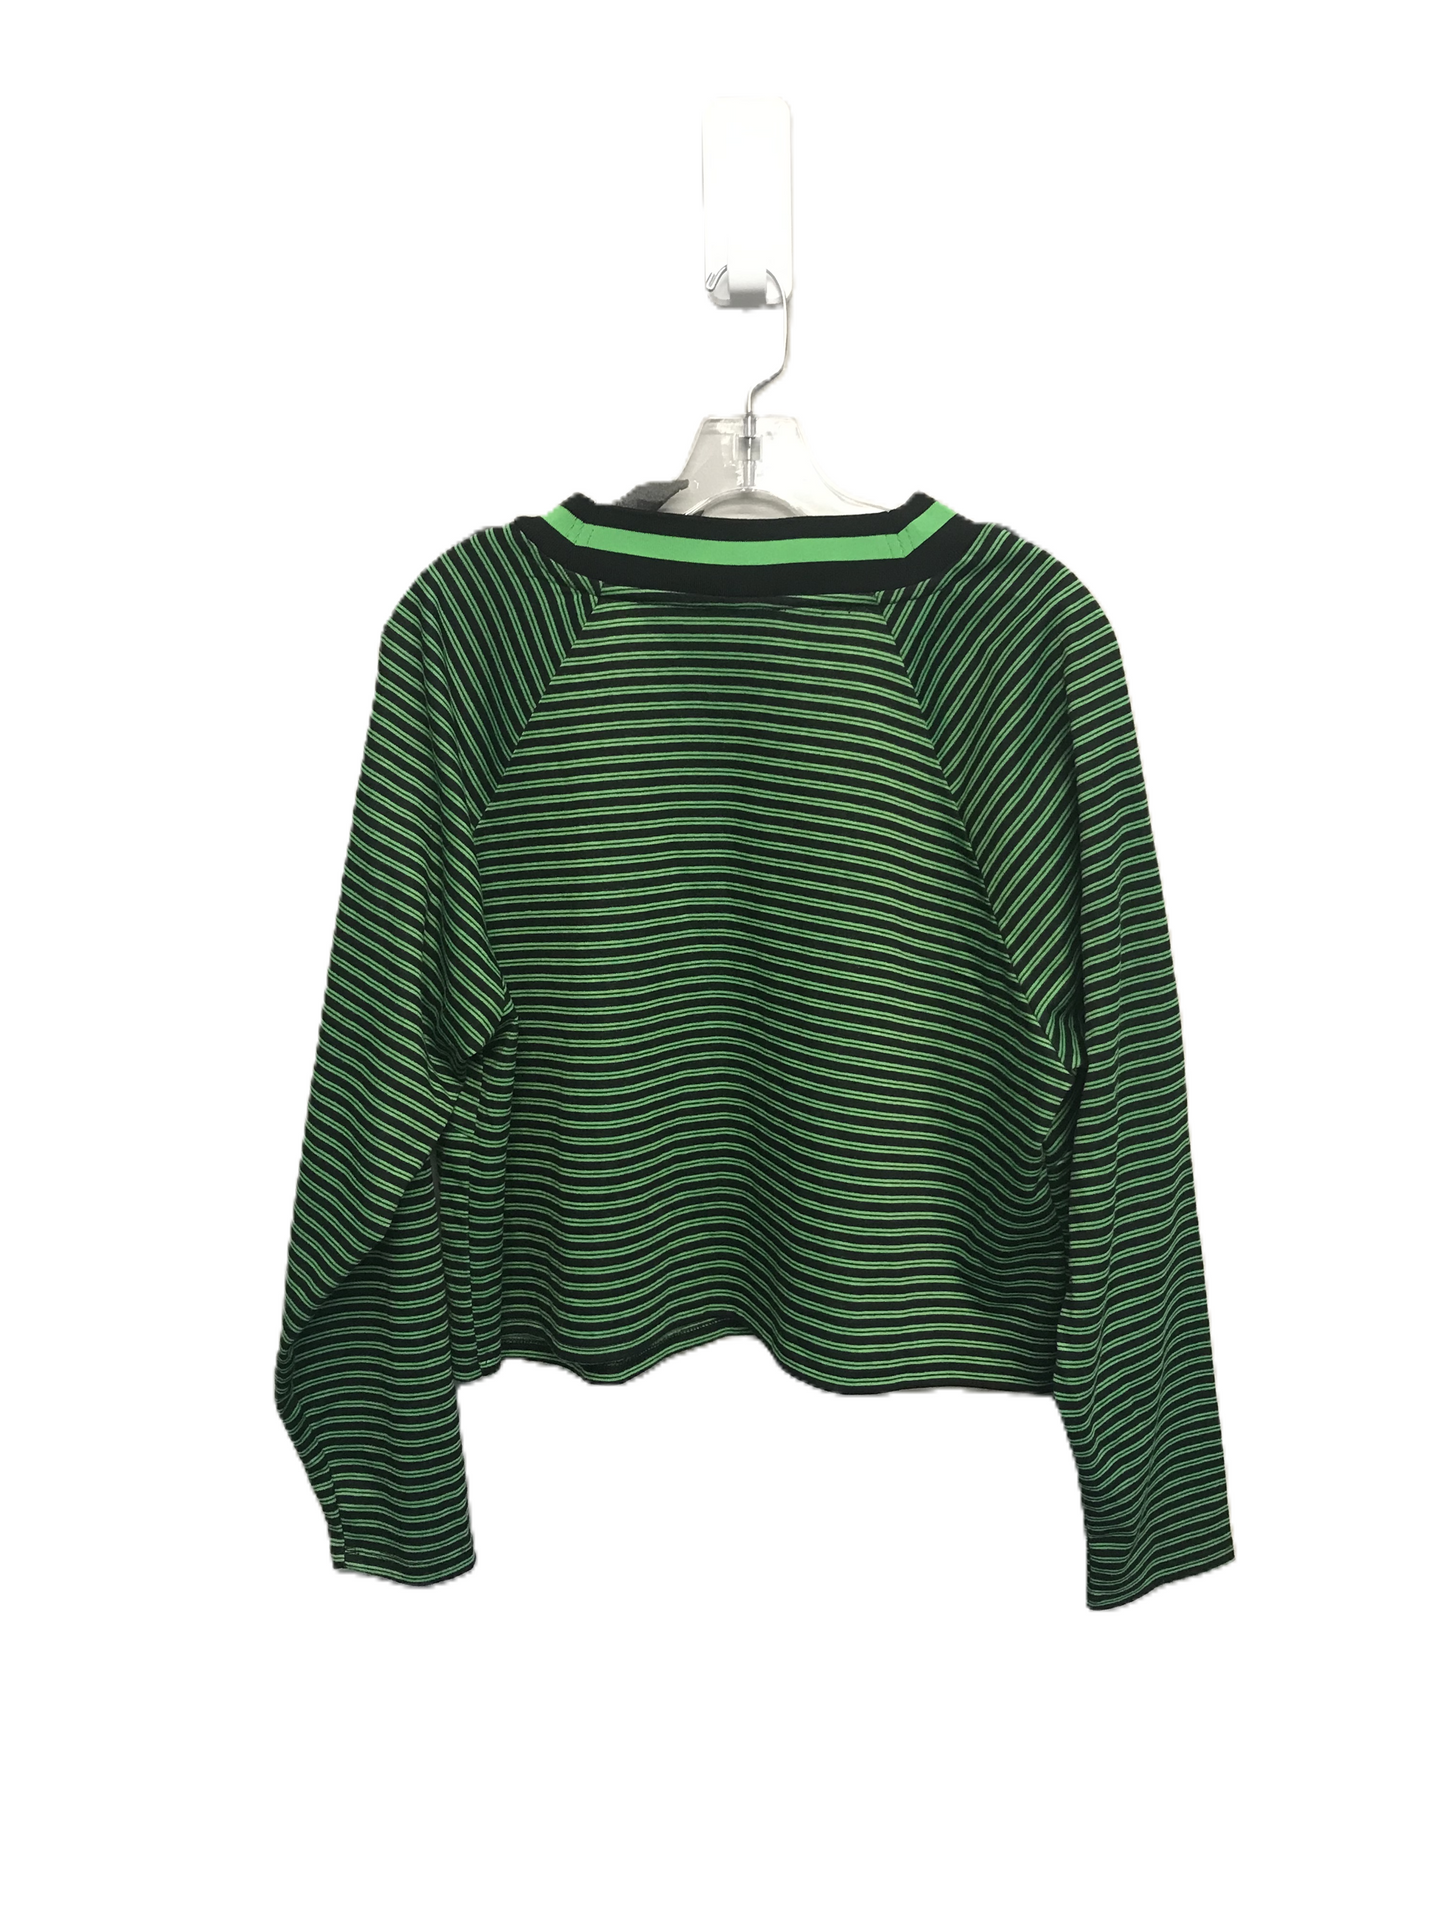 Striped Pattern Top Long Sleeve By Future Collective Size: 2x